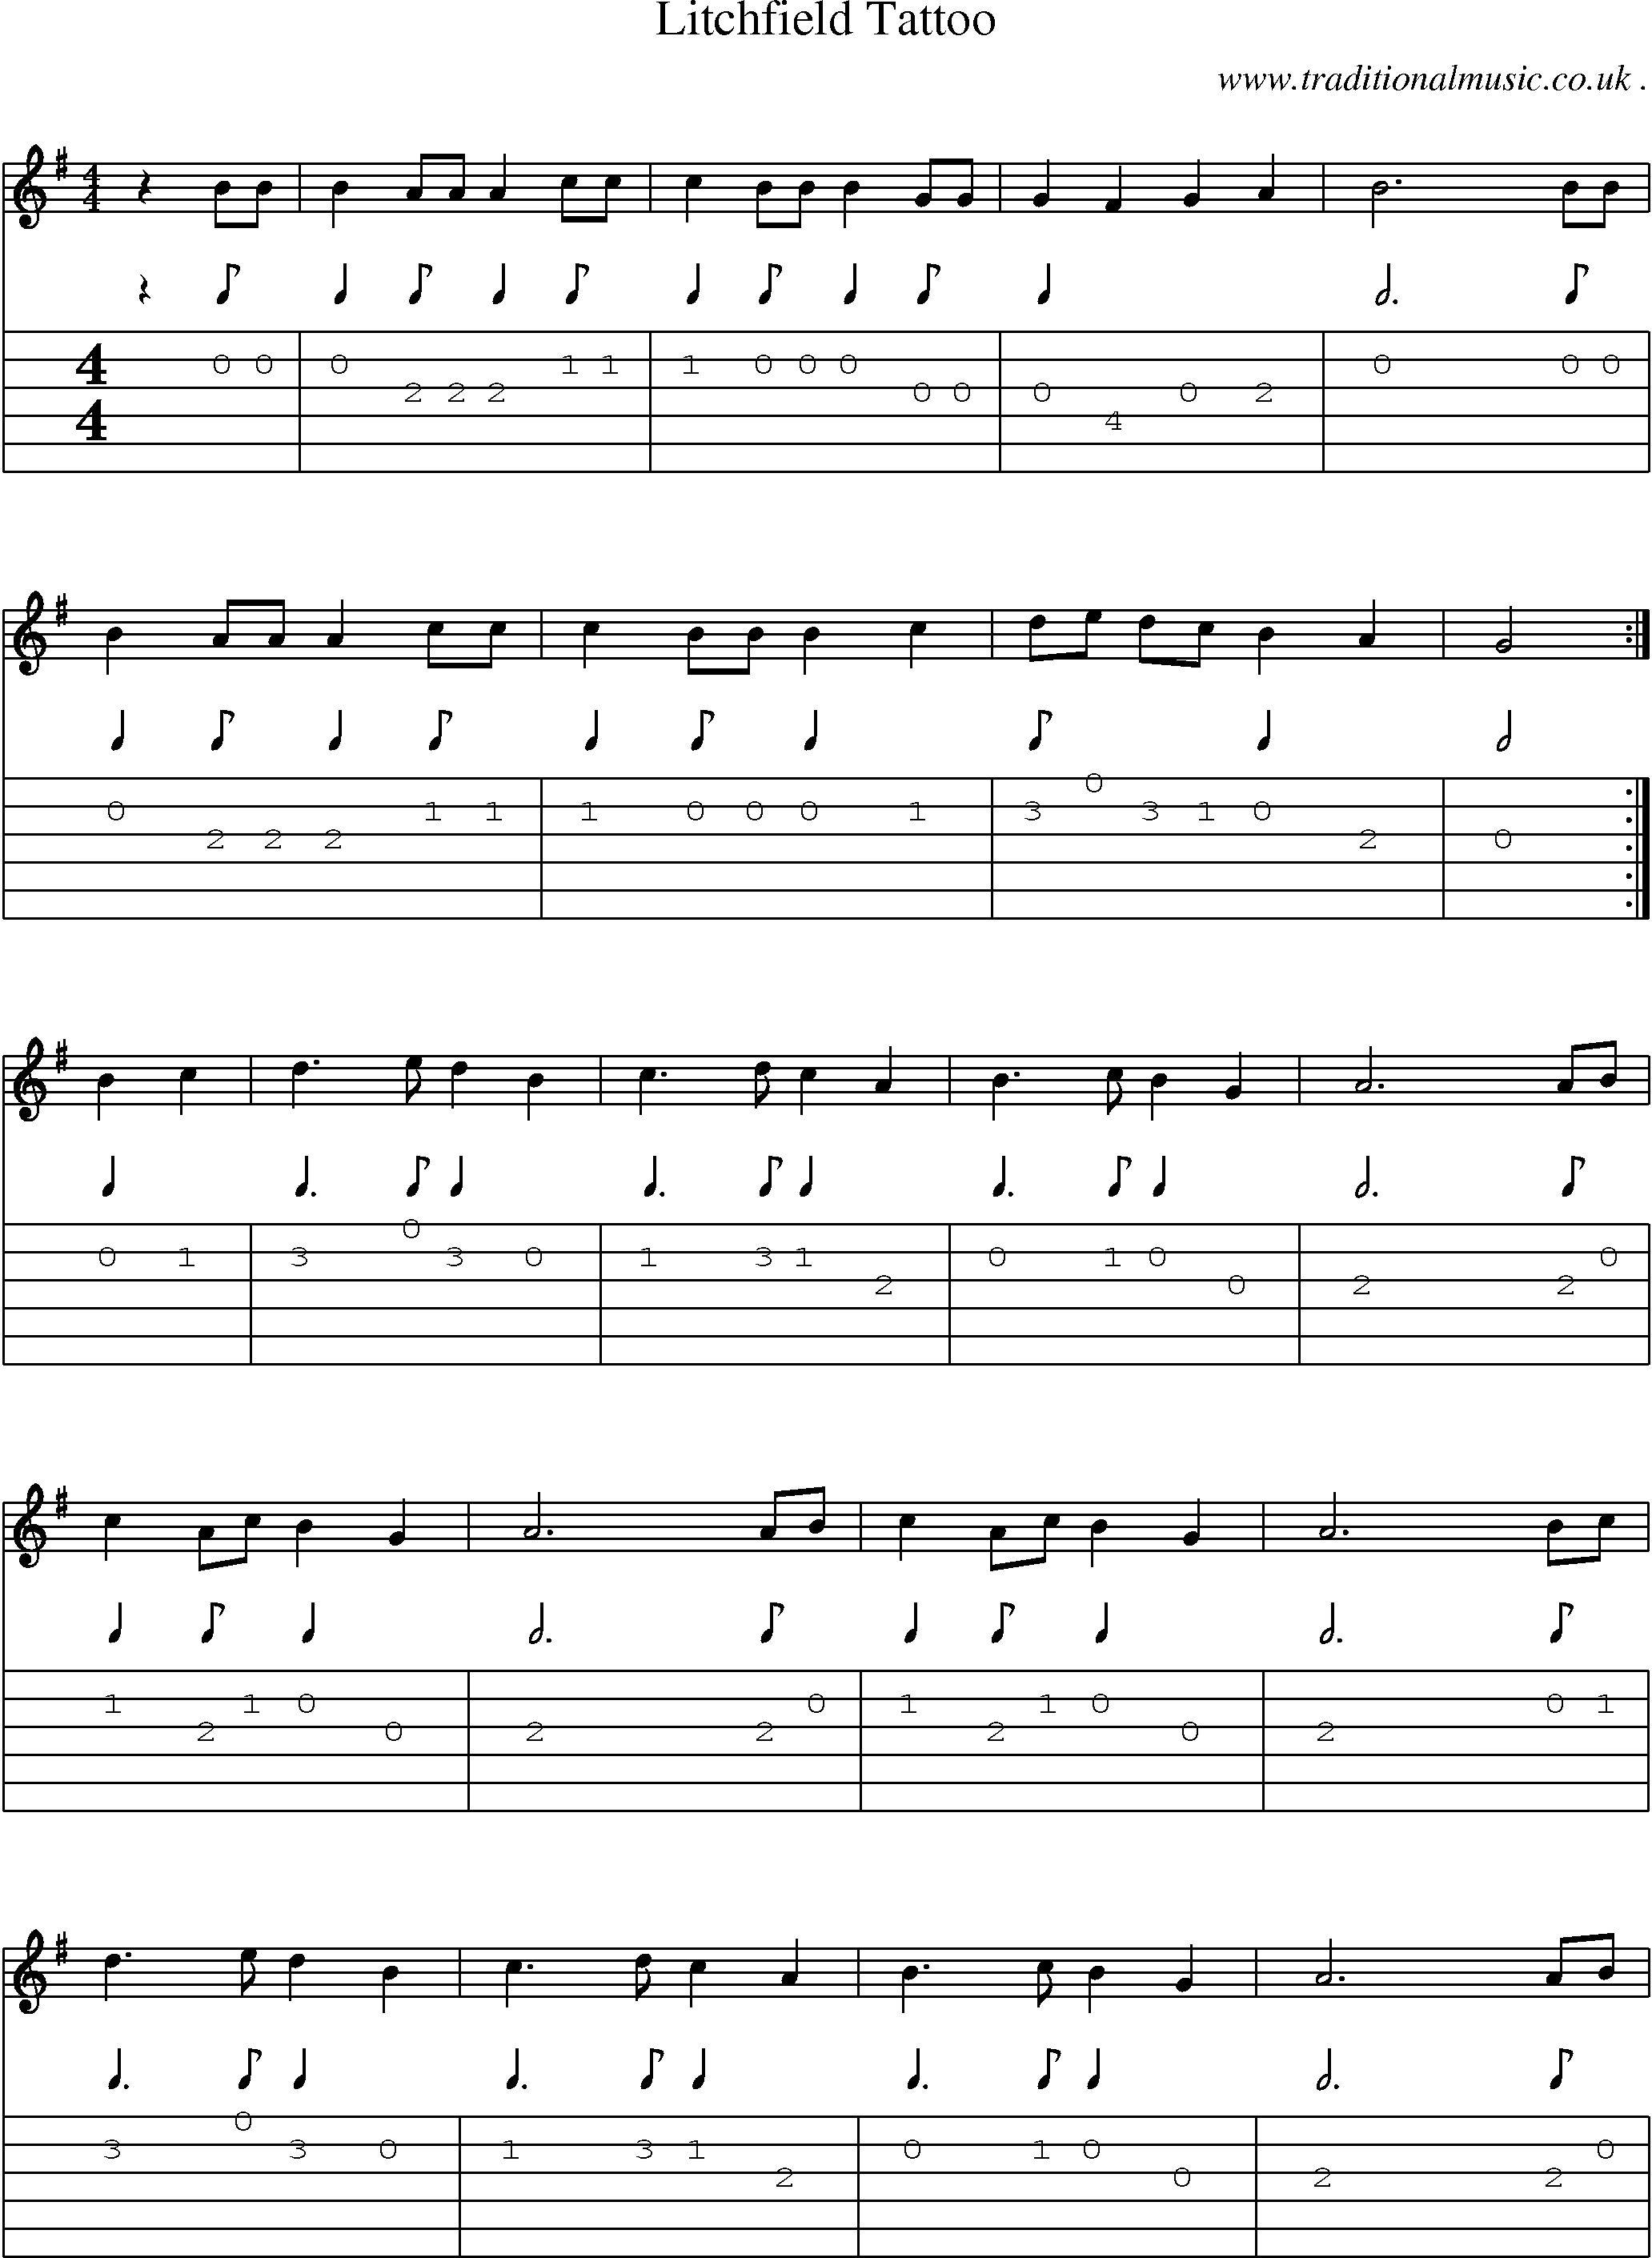 Sheet-Music and Guitar Tabs for Litchfield Tattoo